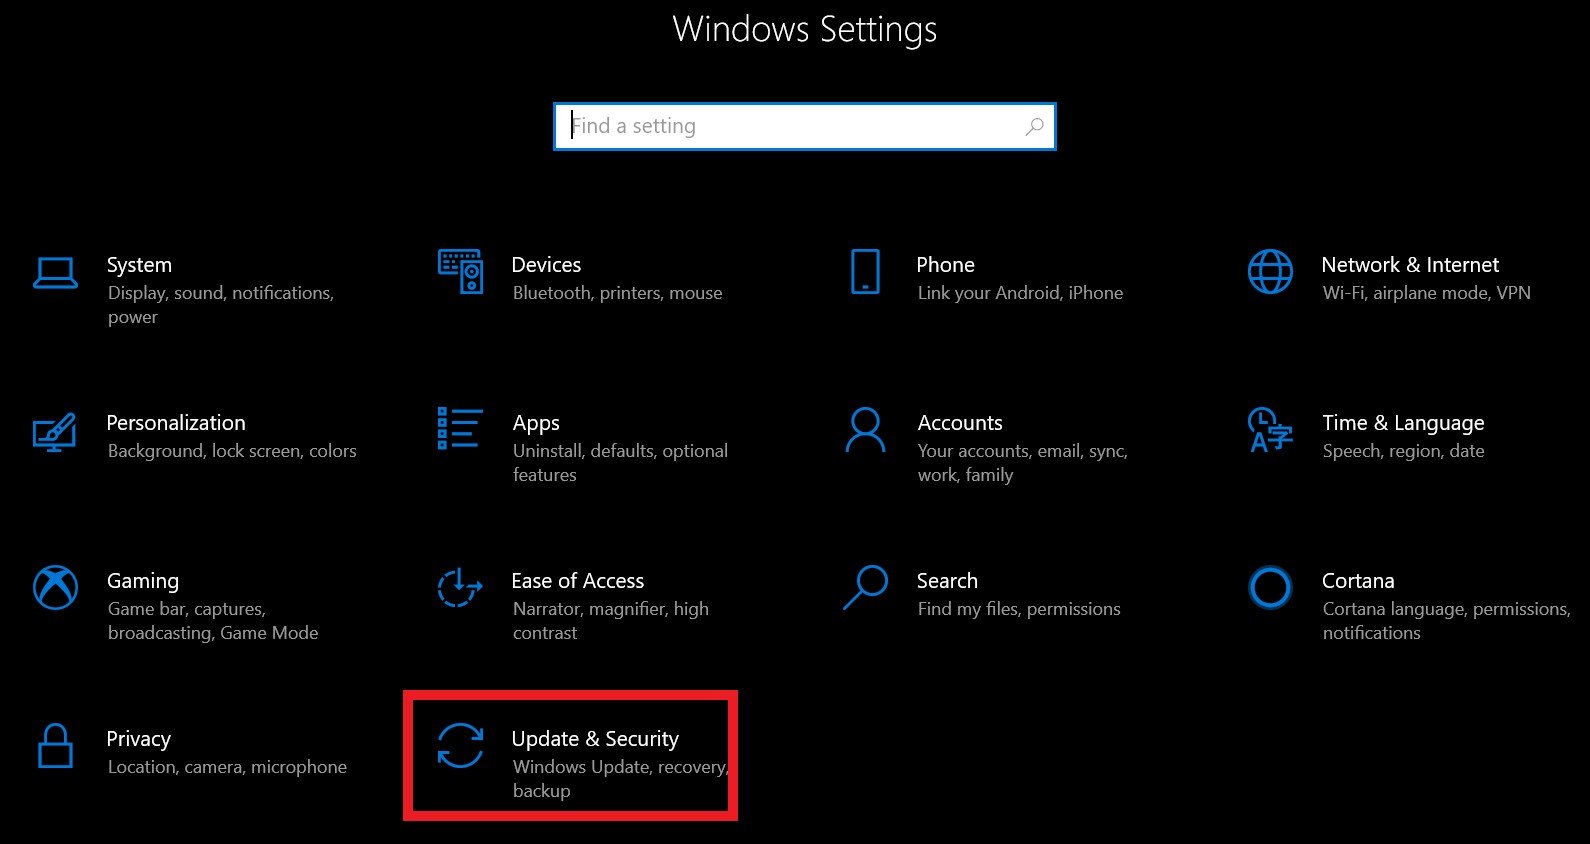 Windows 10 Update and Security